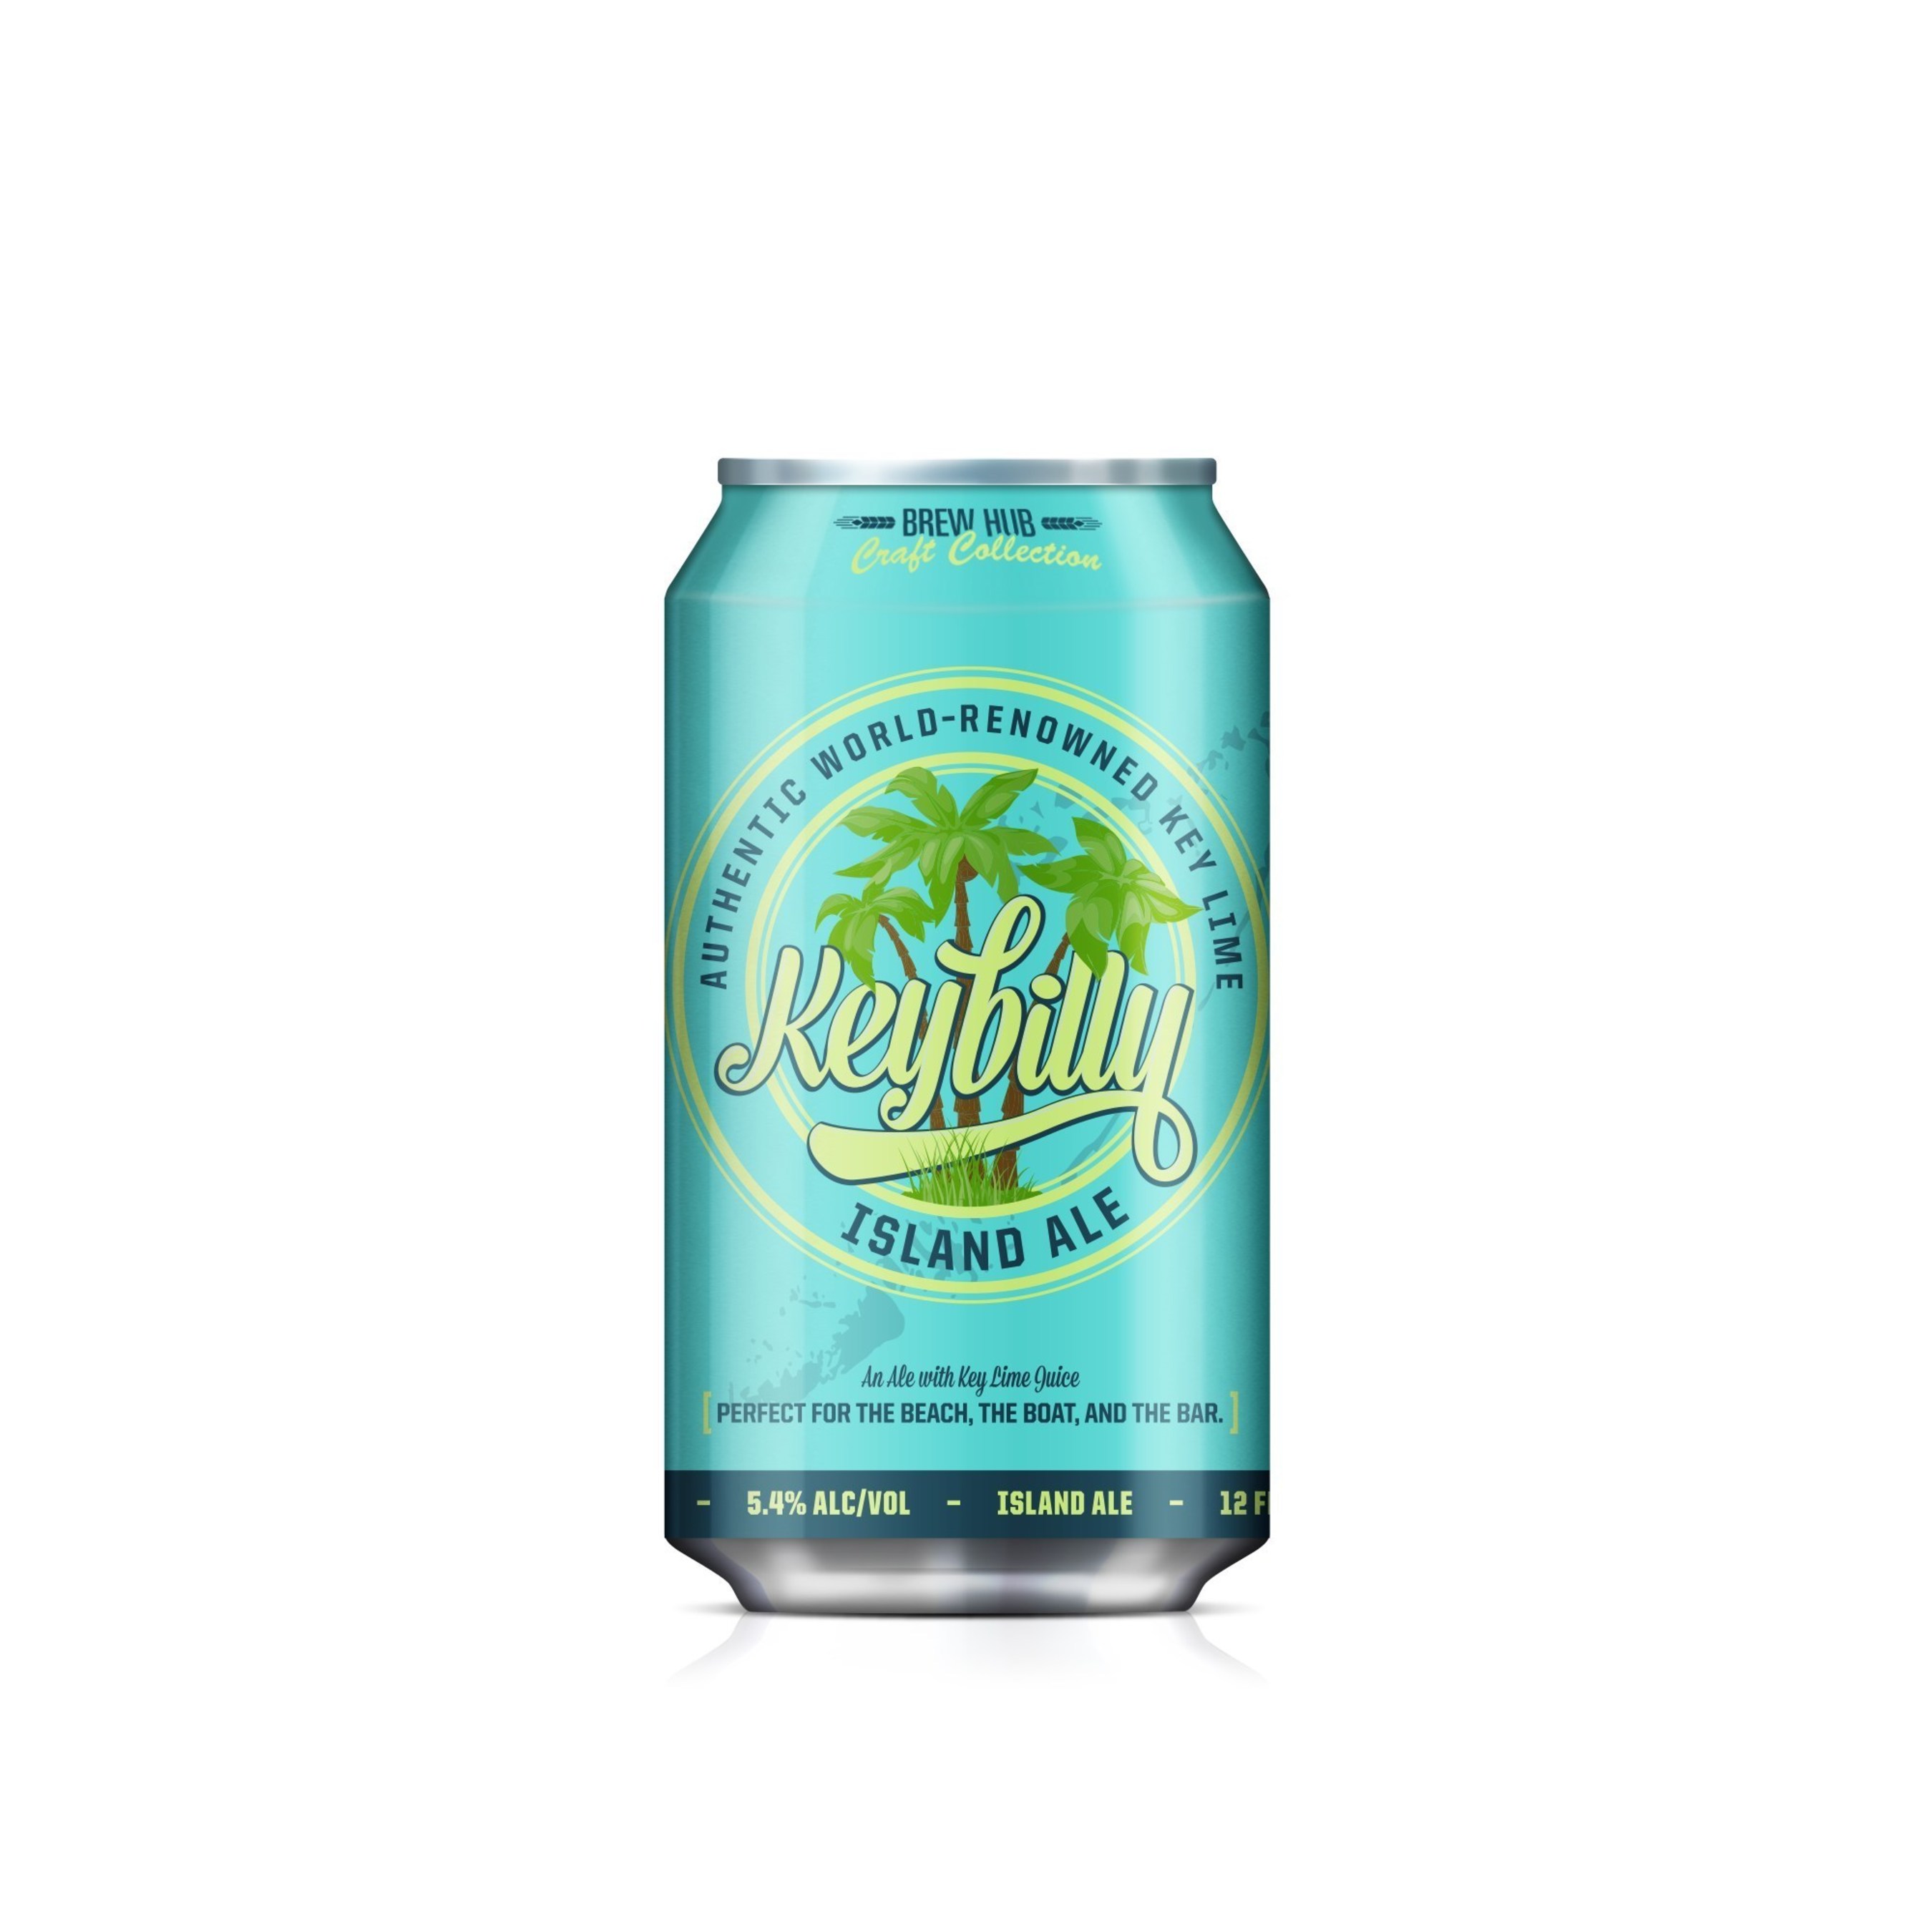 Twelve-ounce can of Keybilly Island Ale brewed at Brew Hub in Lakeland, Florida.